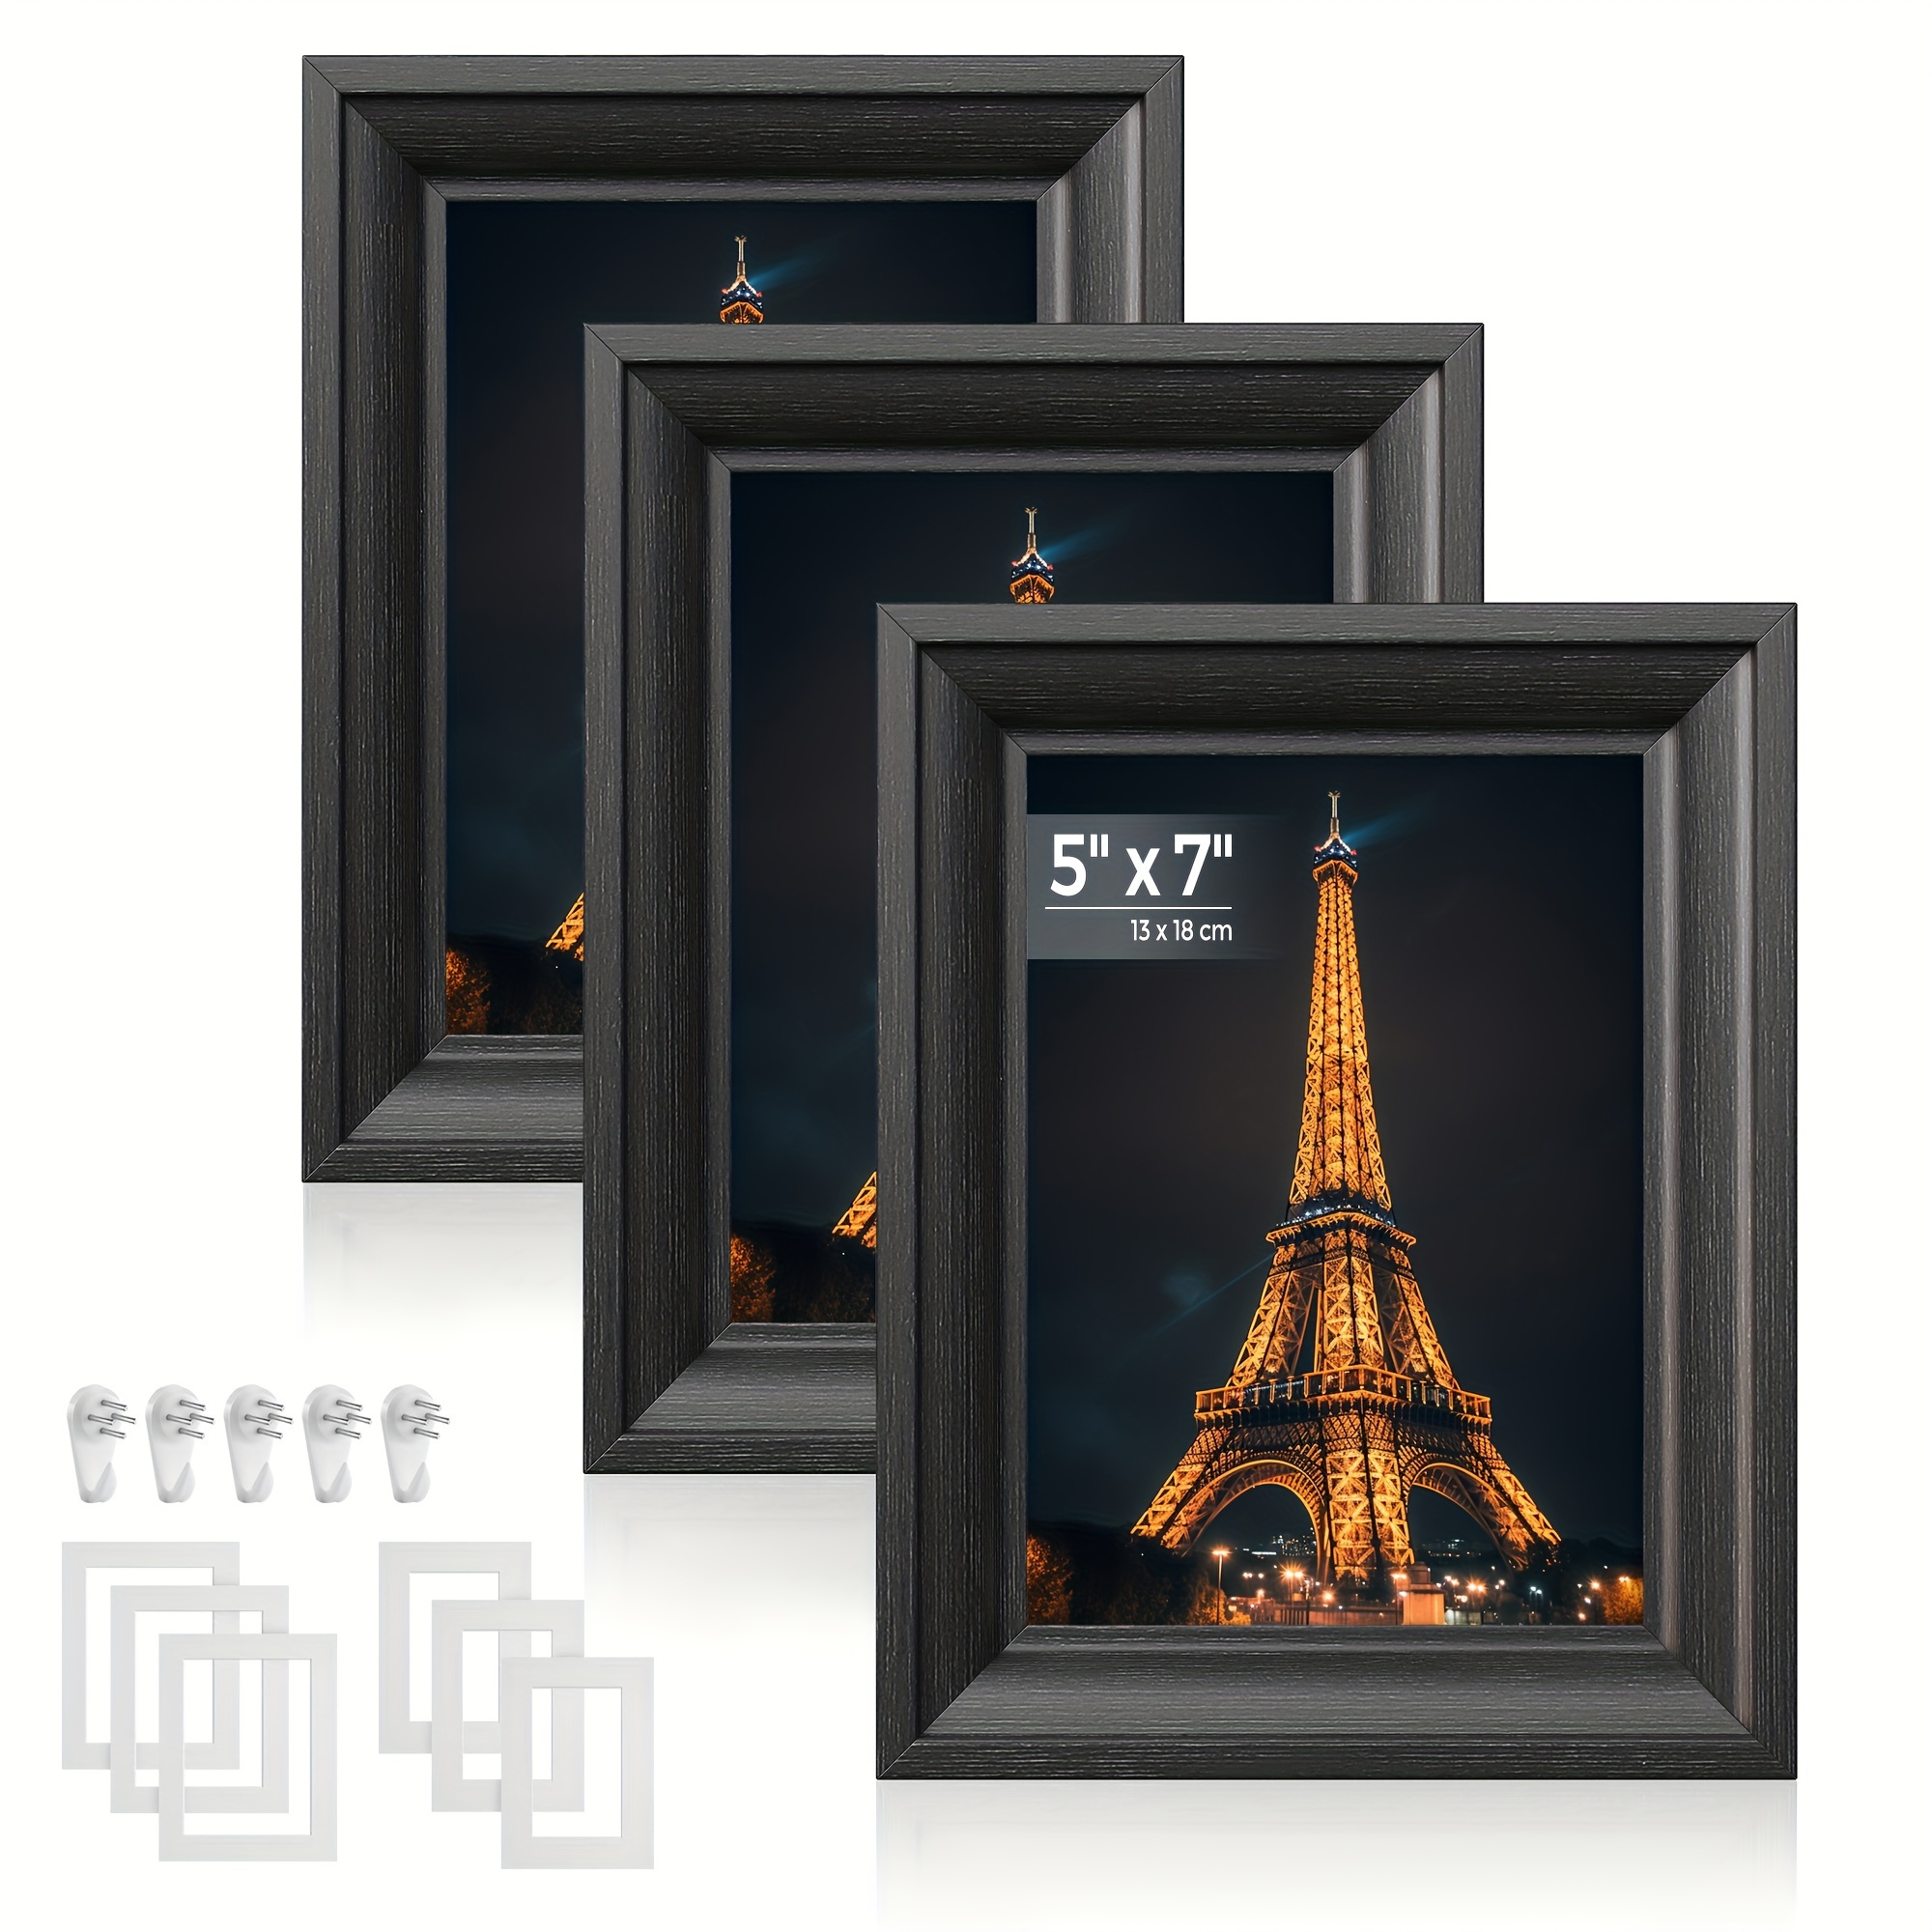 

3pcs/set 5x7 Picture Frames With 6 Mats For Wall, Set Of 3, Collage Photo Frames For 5x7, 4x6, 3.5x5 Pictures, Hanging Or Table Display, Glass Front, 5 Non-trace Nails